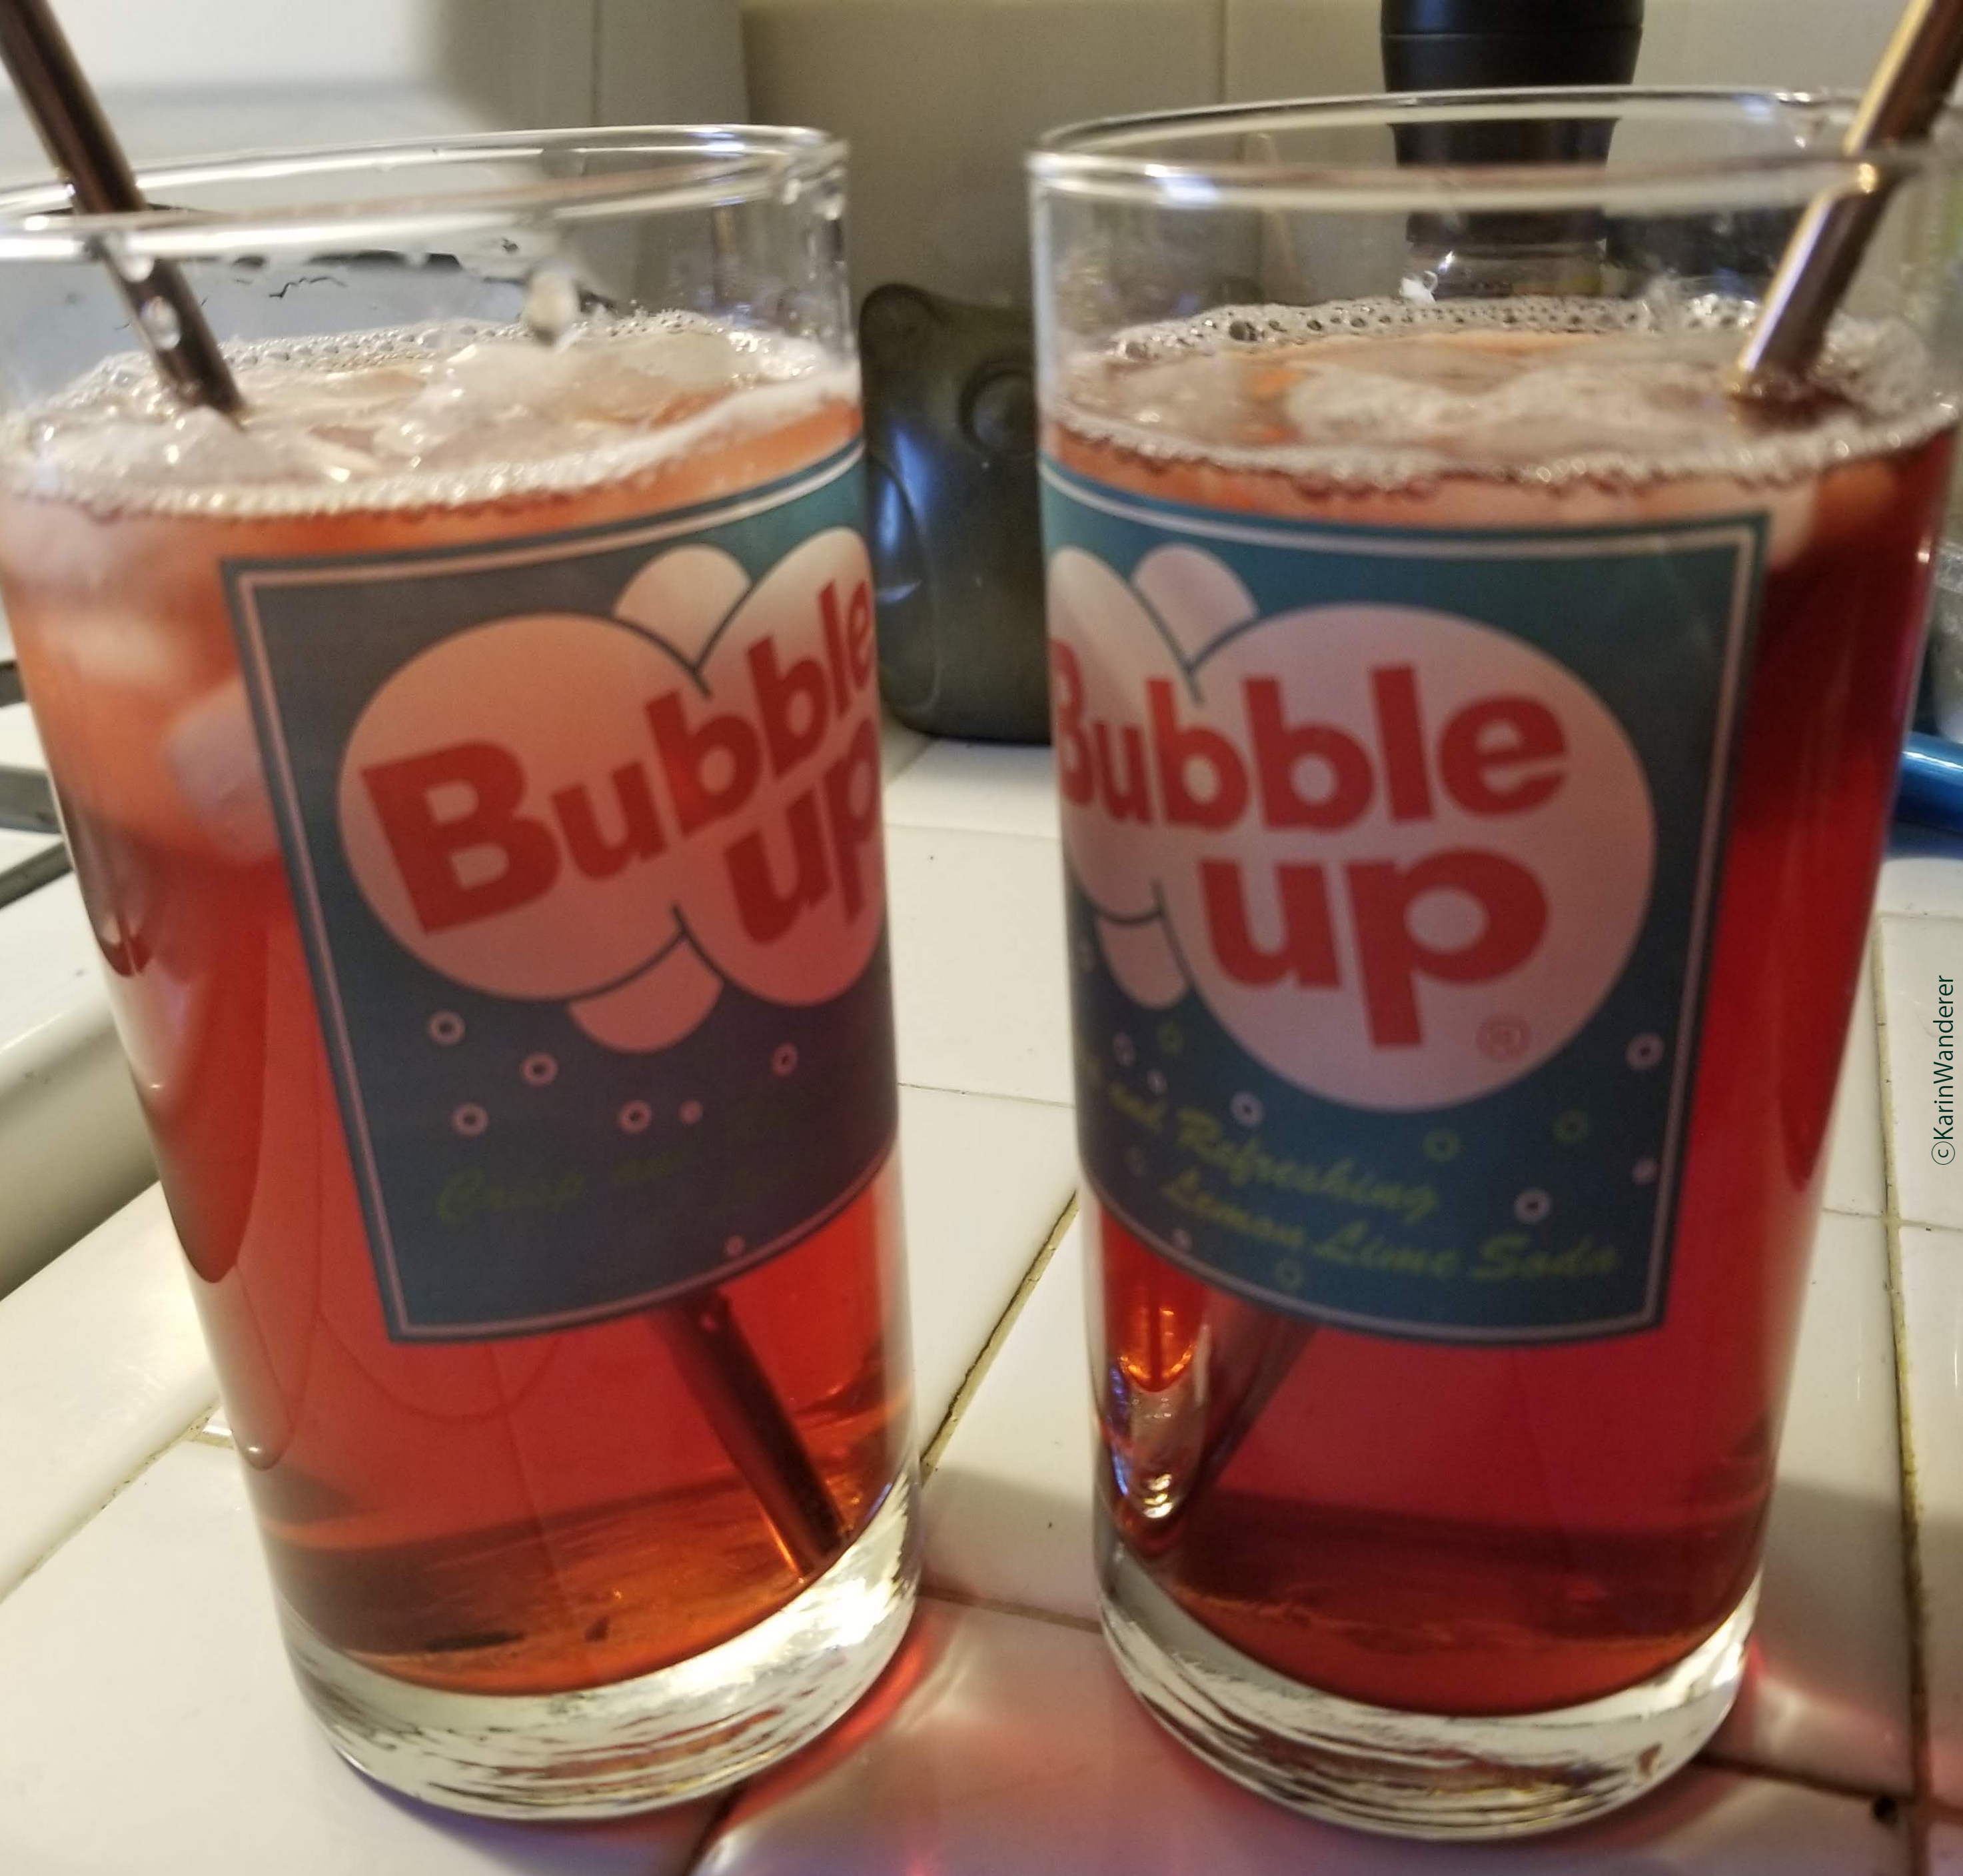 Two glasses full of iced tea sit on a counter. The glasses say "Bubble Up" & have straws sticking out of them.